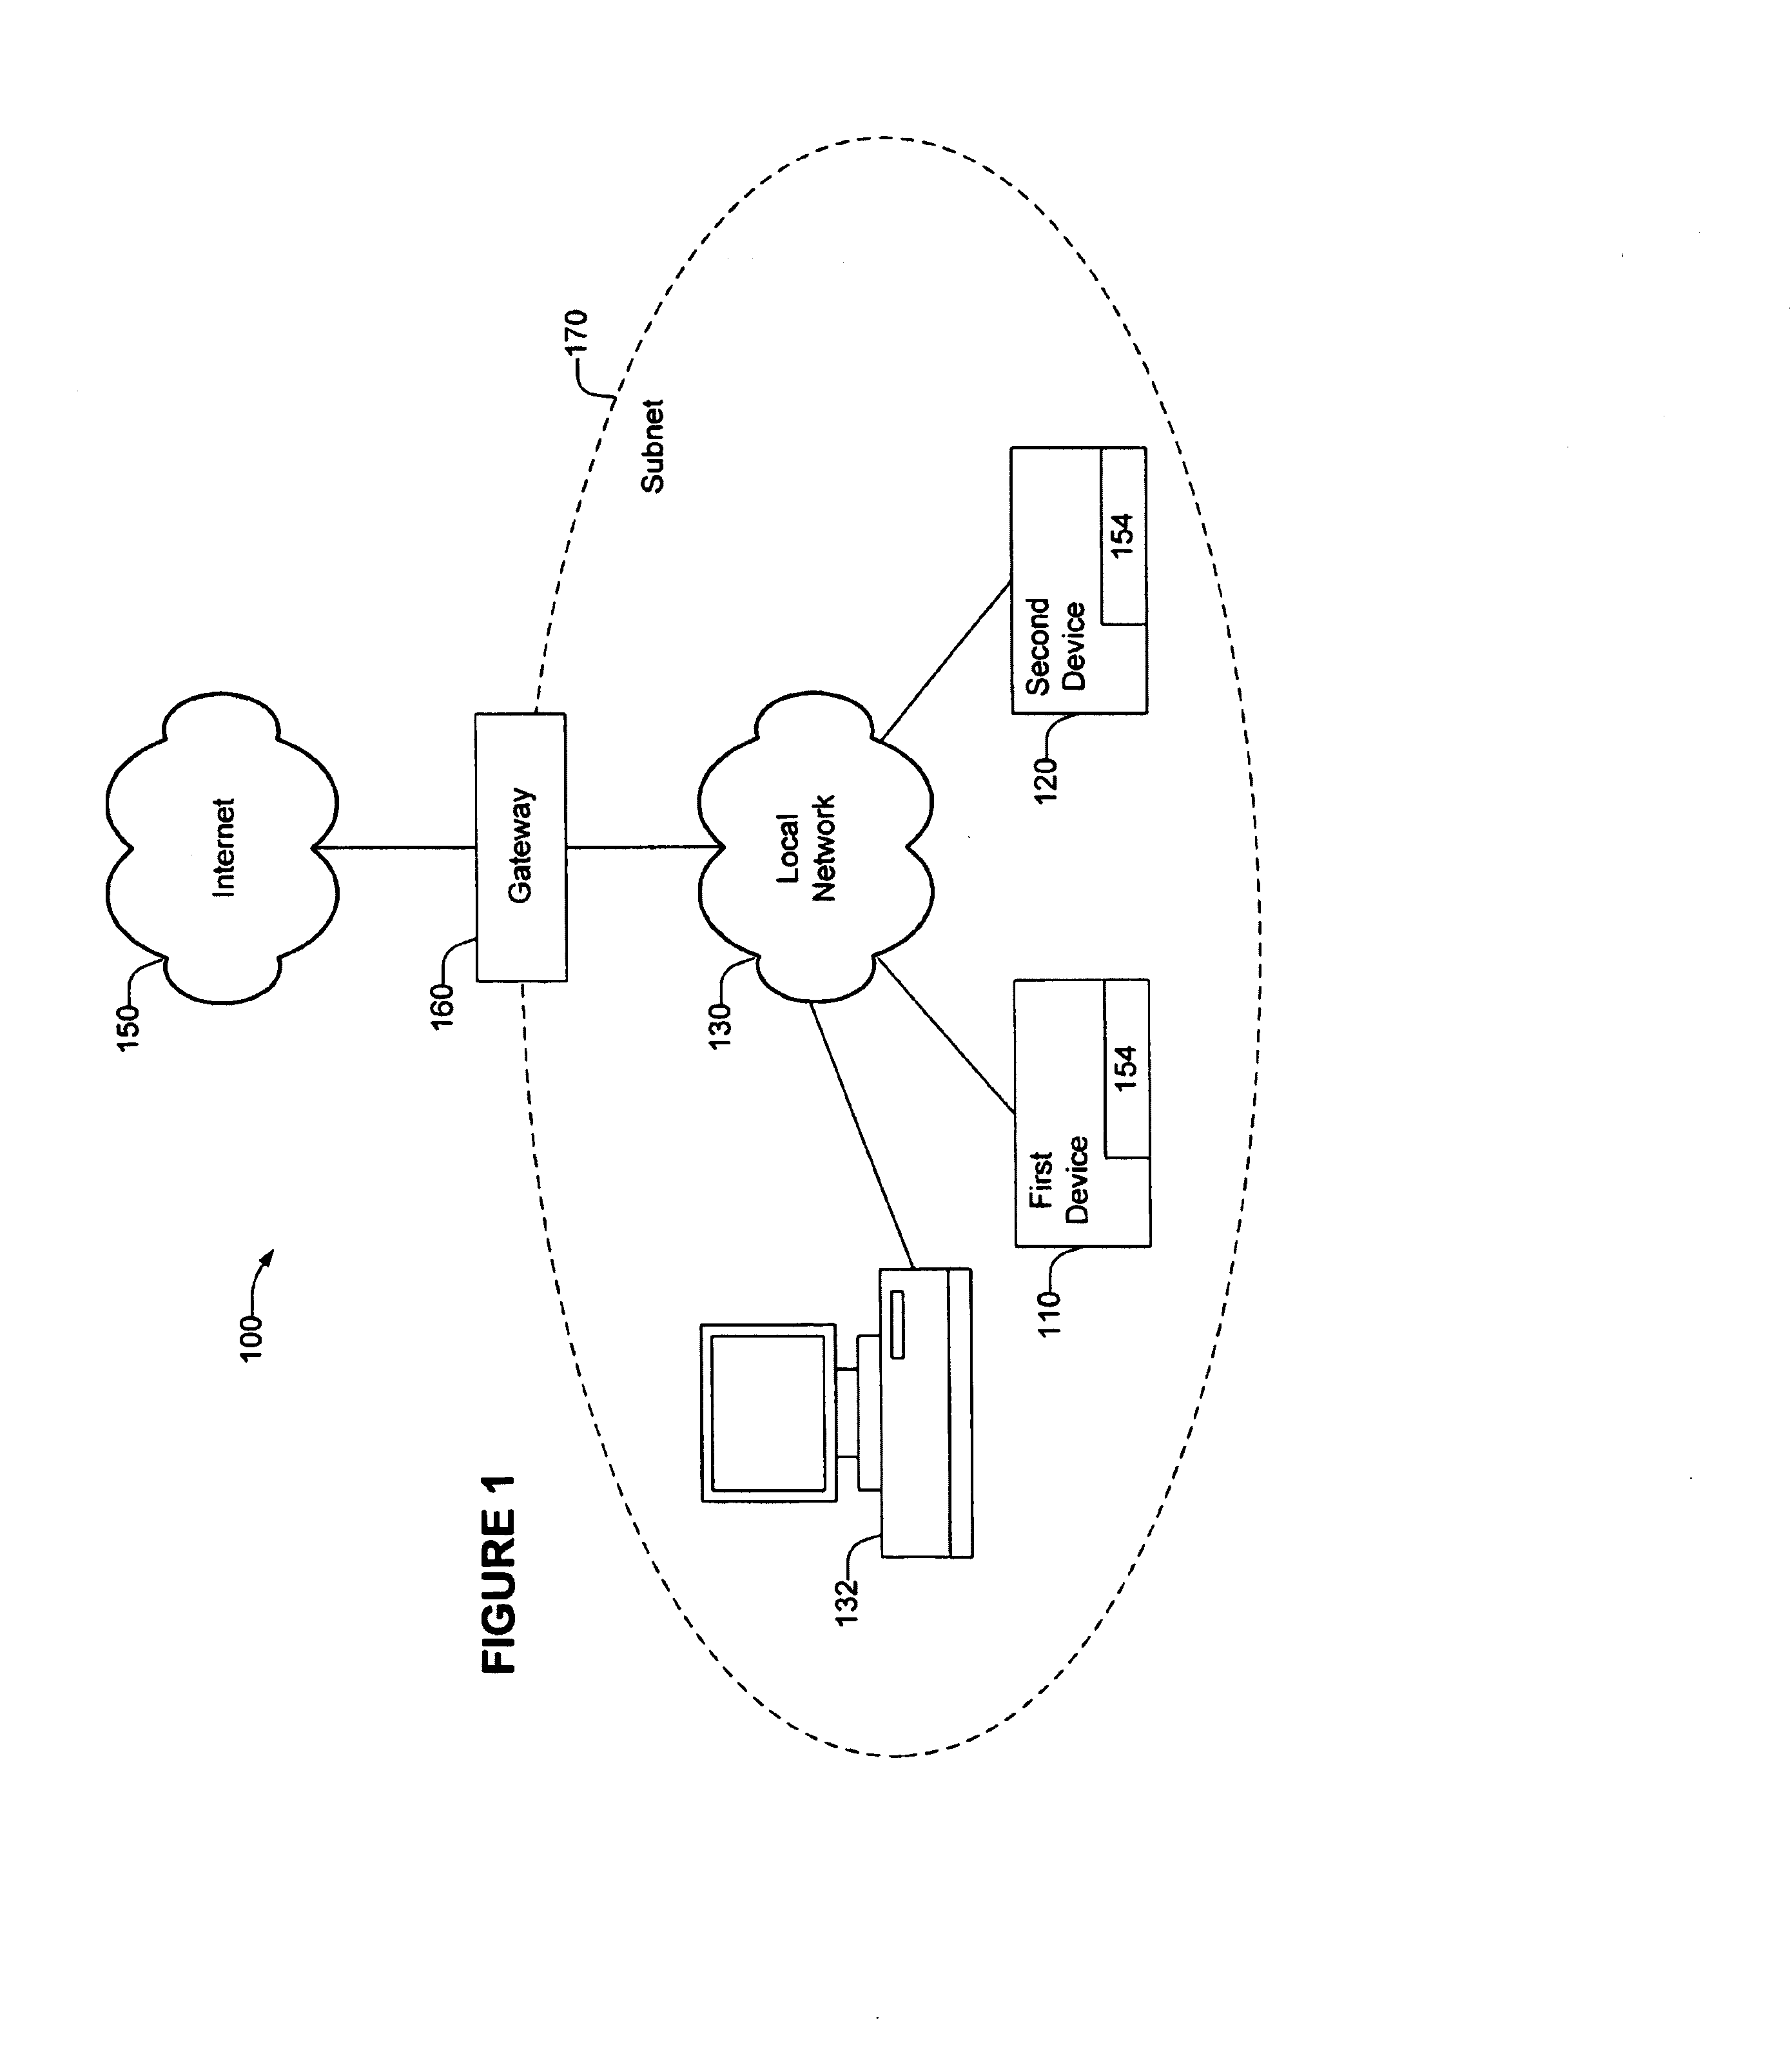 Friend configuration and method for network devices